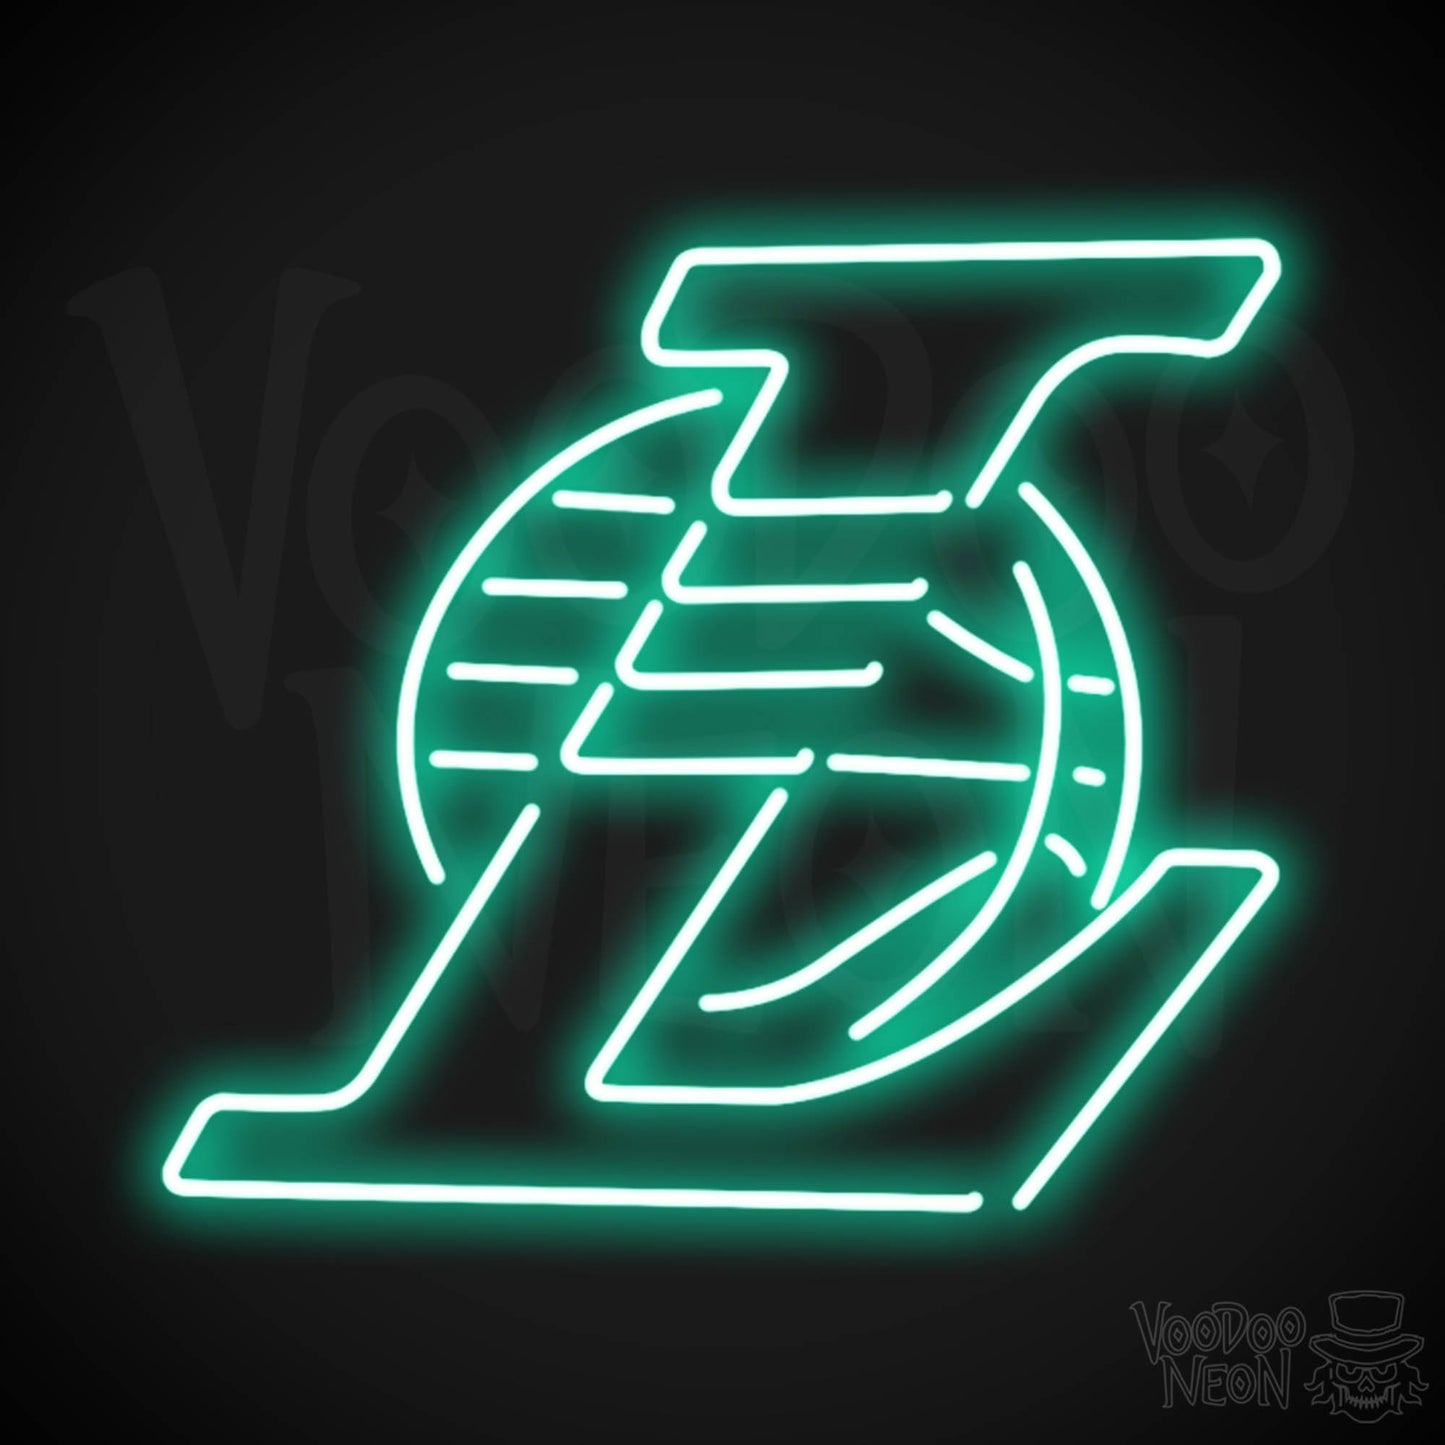 Los Angeles Lakers Neon Sign - Los Angeles Lakers Sign - Neon Lakers Logo Wall Art - Color Light Green